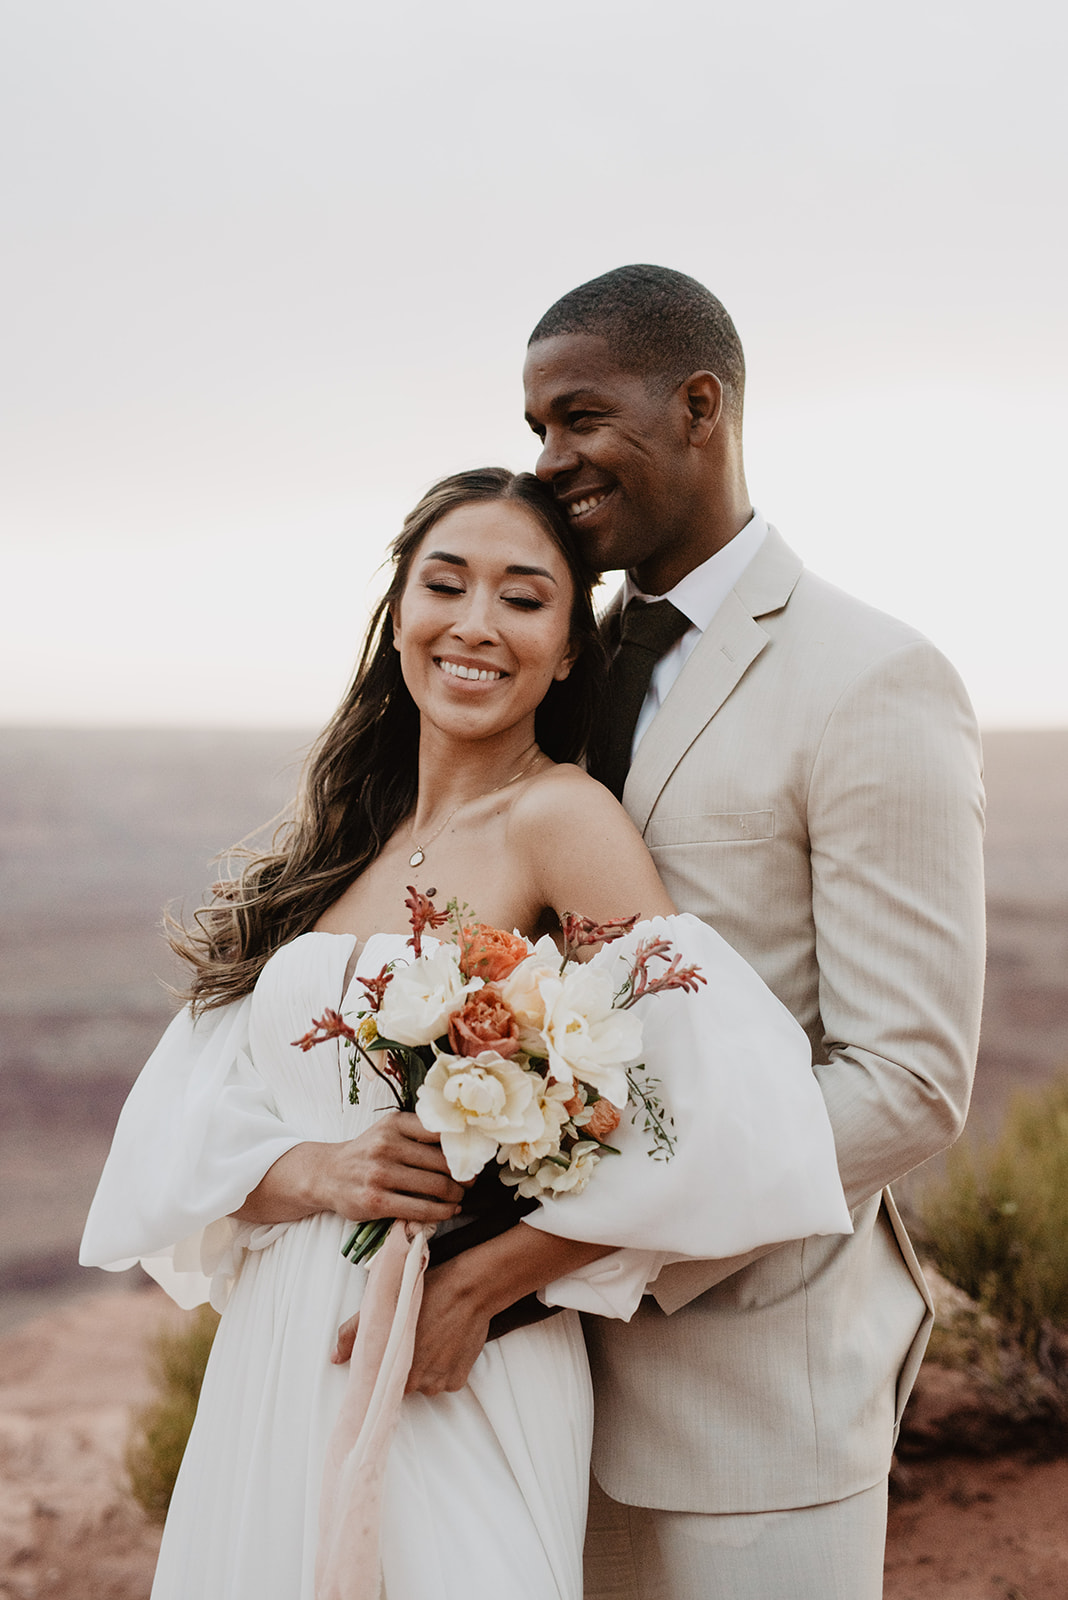 groom standing behind his bride as she leans back into him and smiles while she holds her floral wedding bouquet captured by Utah elopement photographer for Arches National Park wedding